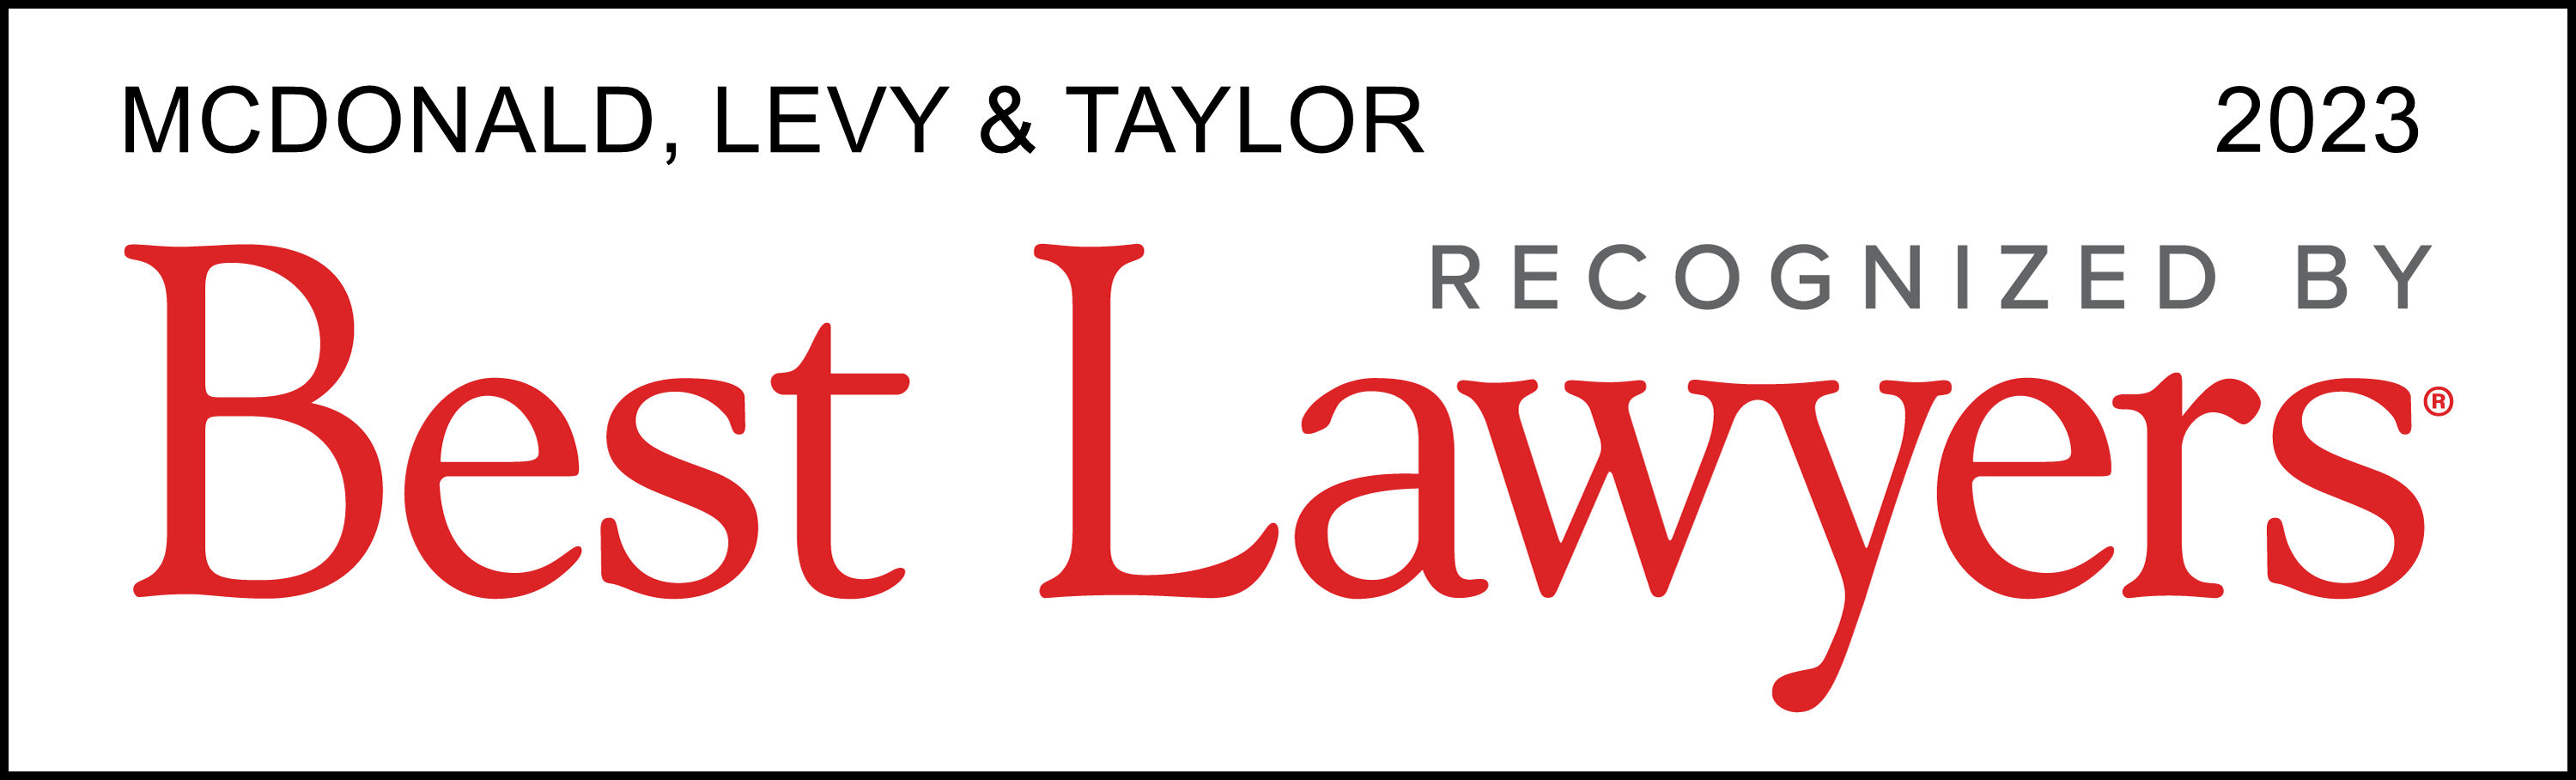 McDonald, Levy & Taylor recognized by Best Lawyers 2023